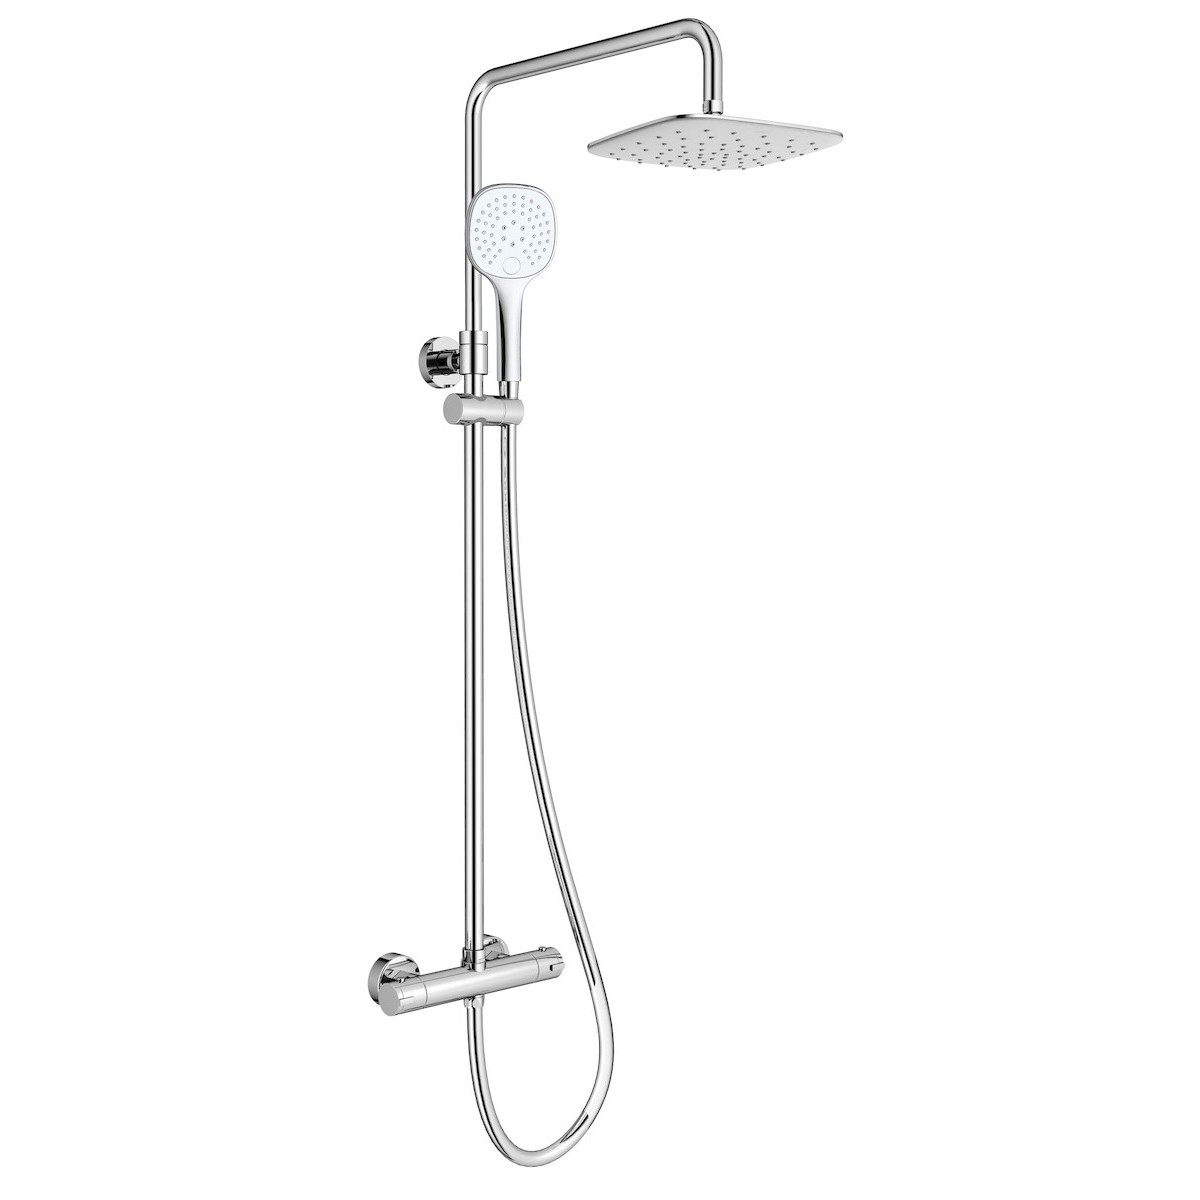 2 Way Thermostatic Mixer Shower